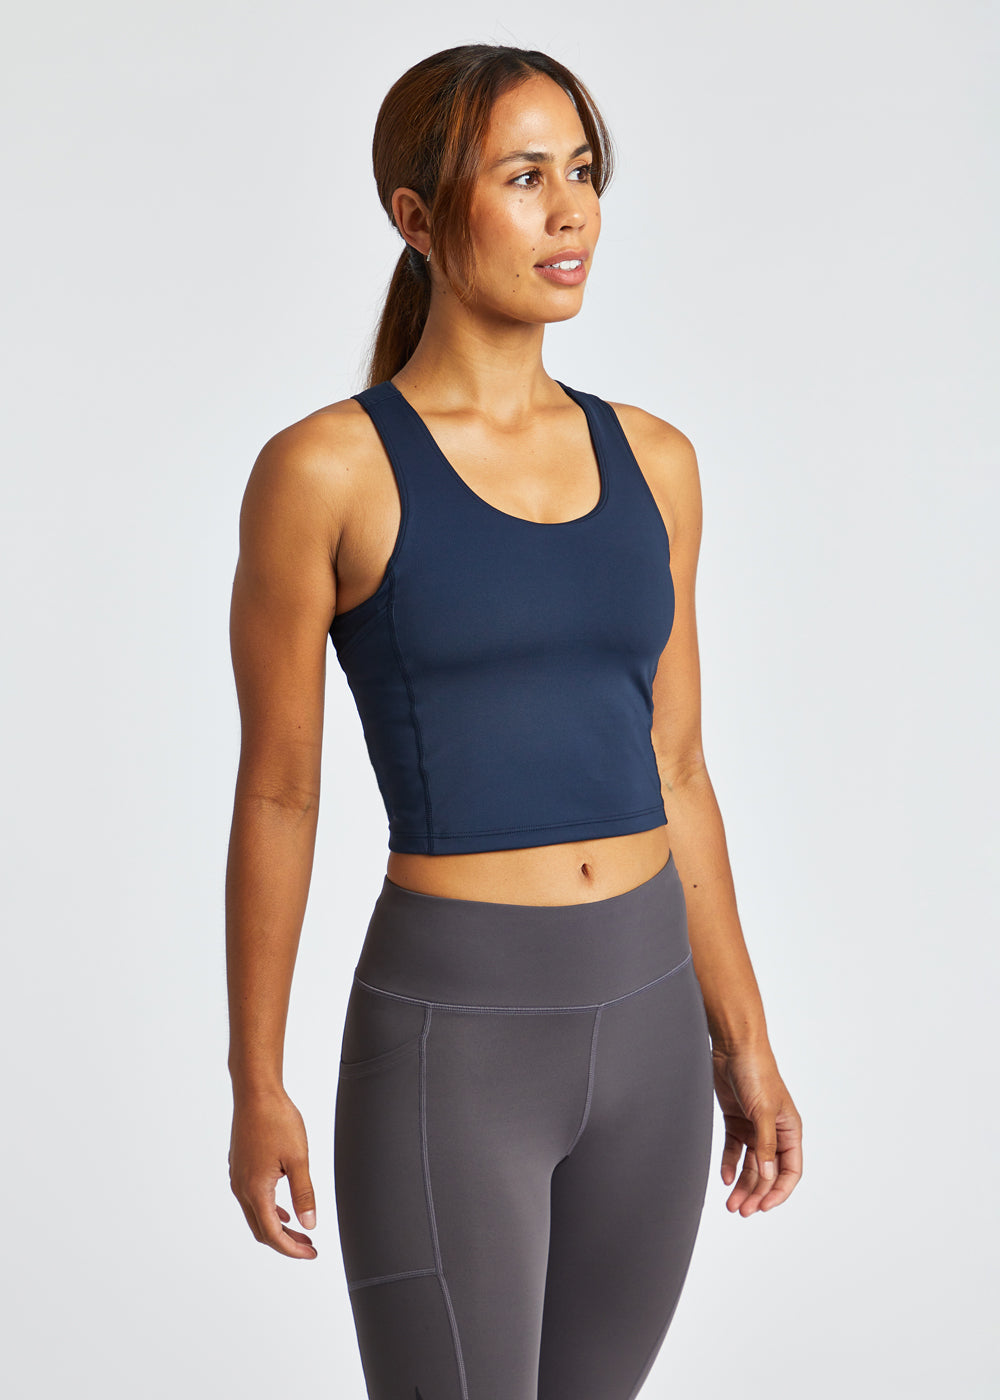 She has something to SMILE 😊 about! The Oiselle Pockito Bra is beautiful,  fits like a dream AND has pockets! Easily carry your phone o